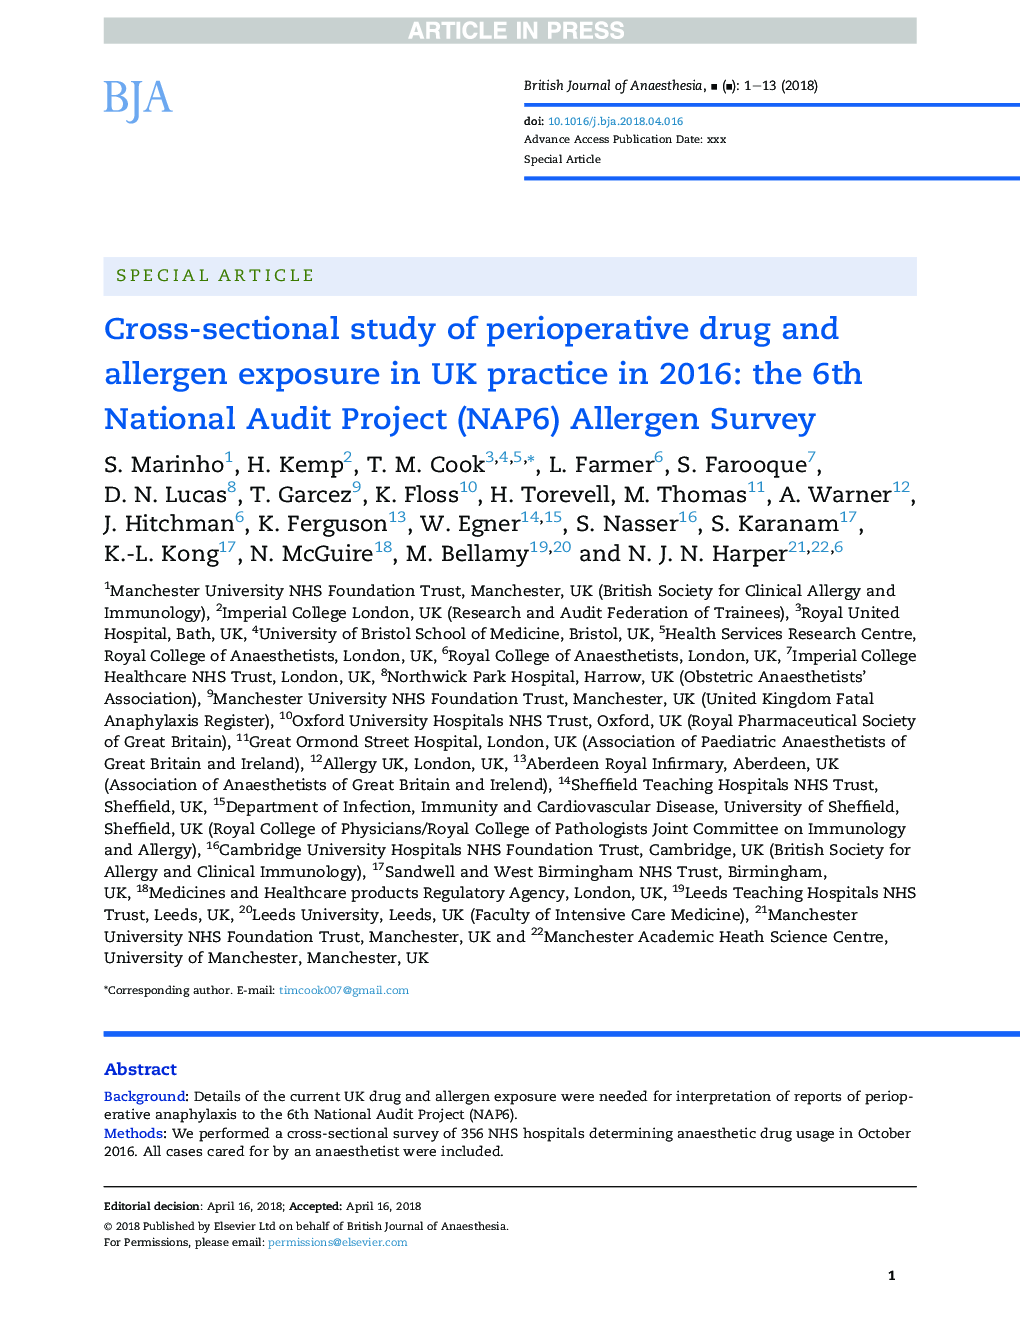 Cross-sectional study of perioperative drug and allergen exposure in UK practice in 2016: the 6th National Audit Project (NAP6) Allergen Survey